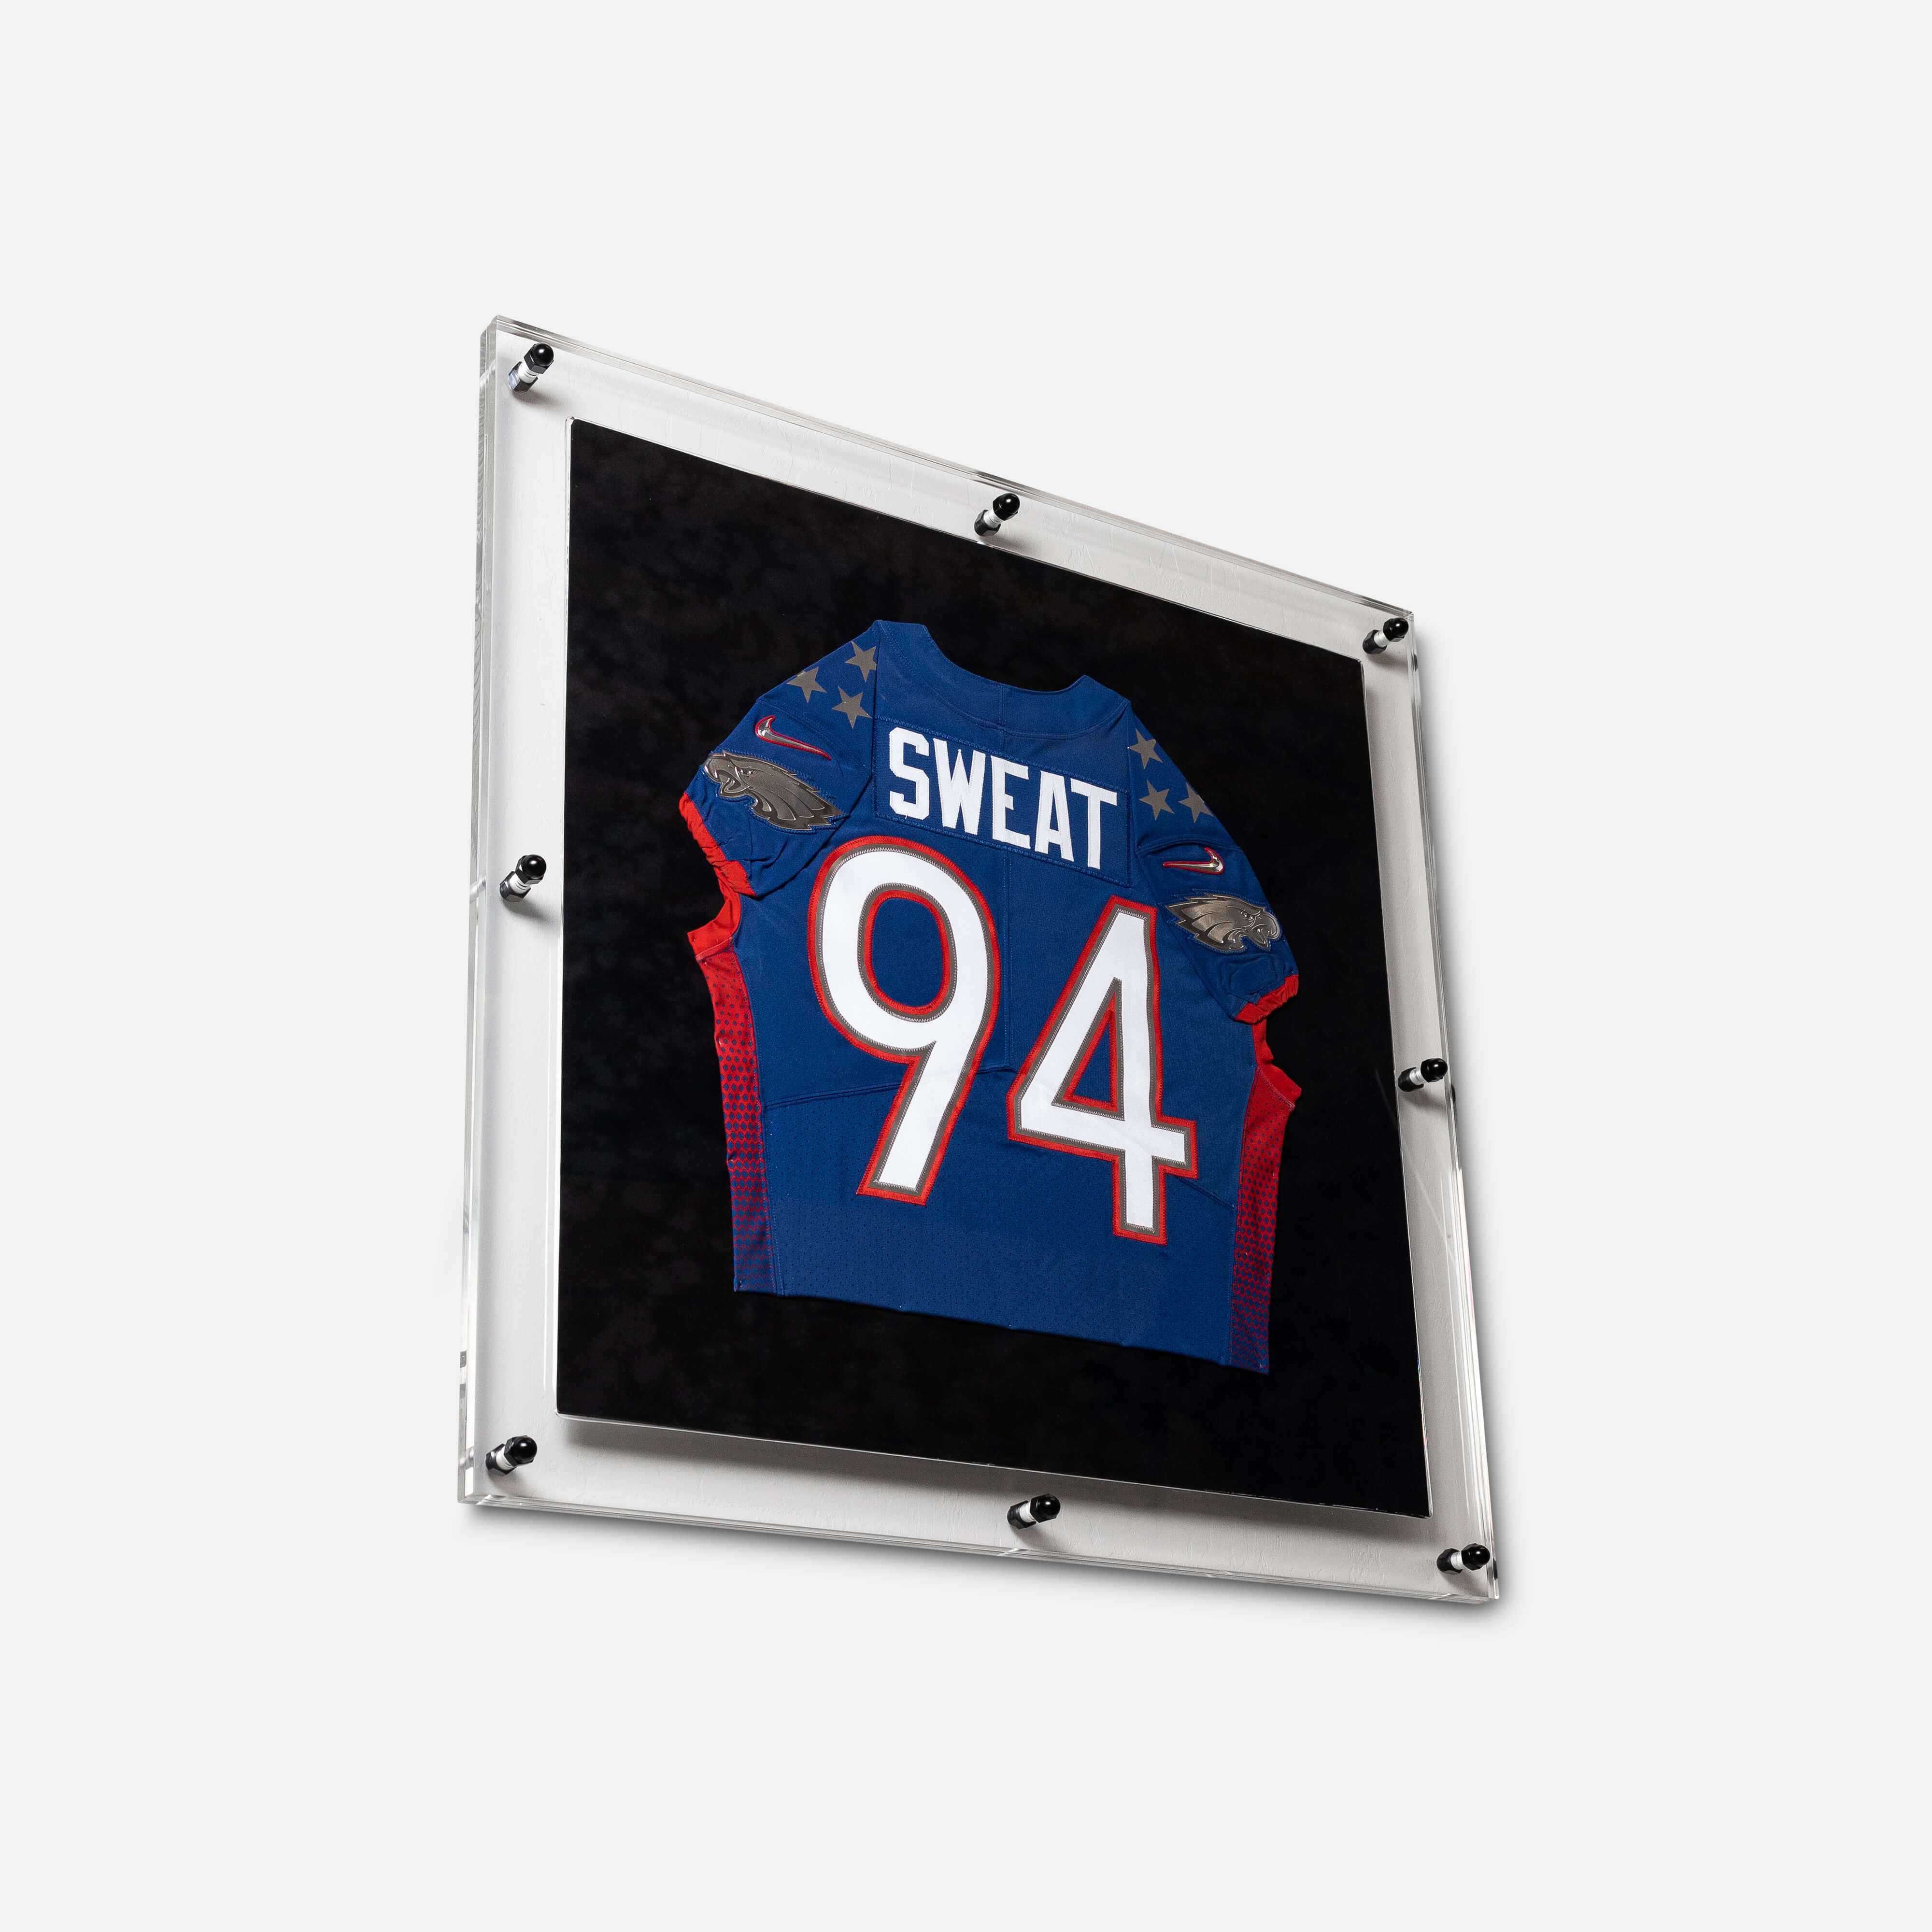 Jersey Frame Display Case - Shadow Box for Jersey Display